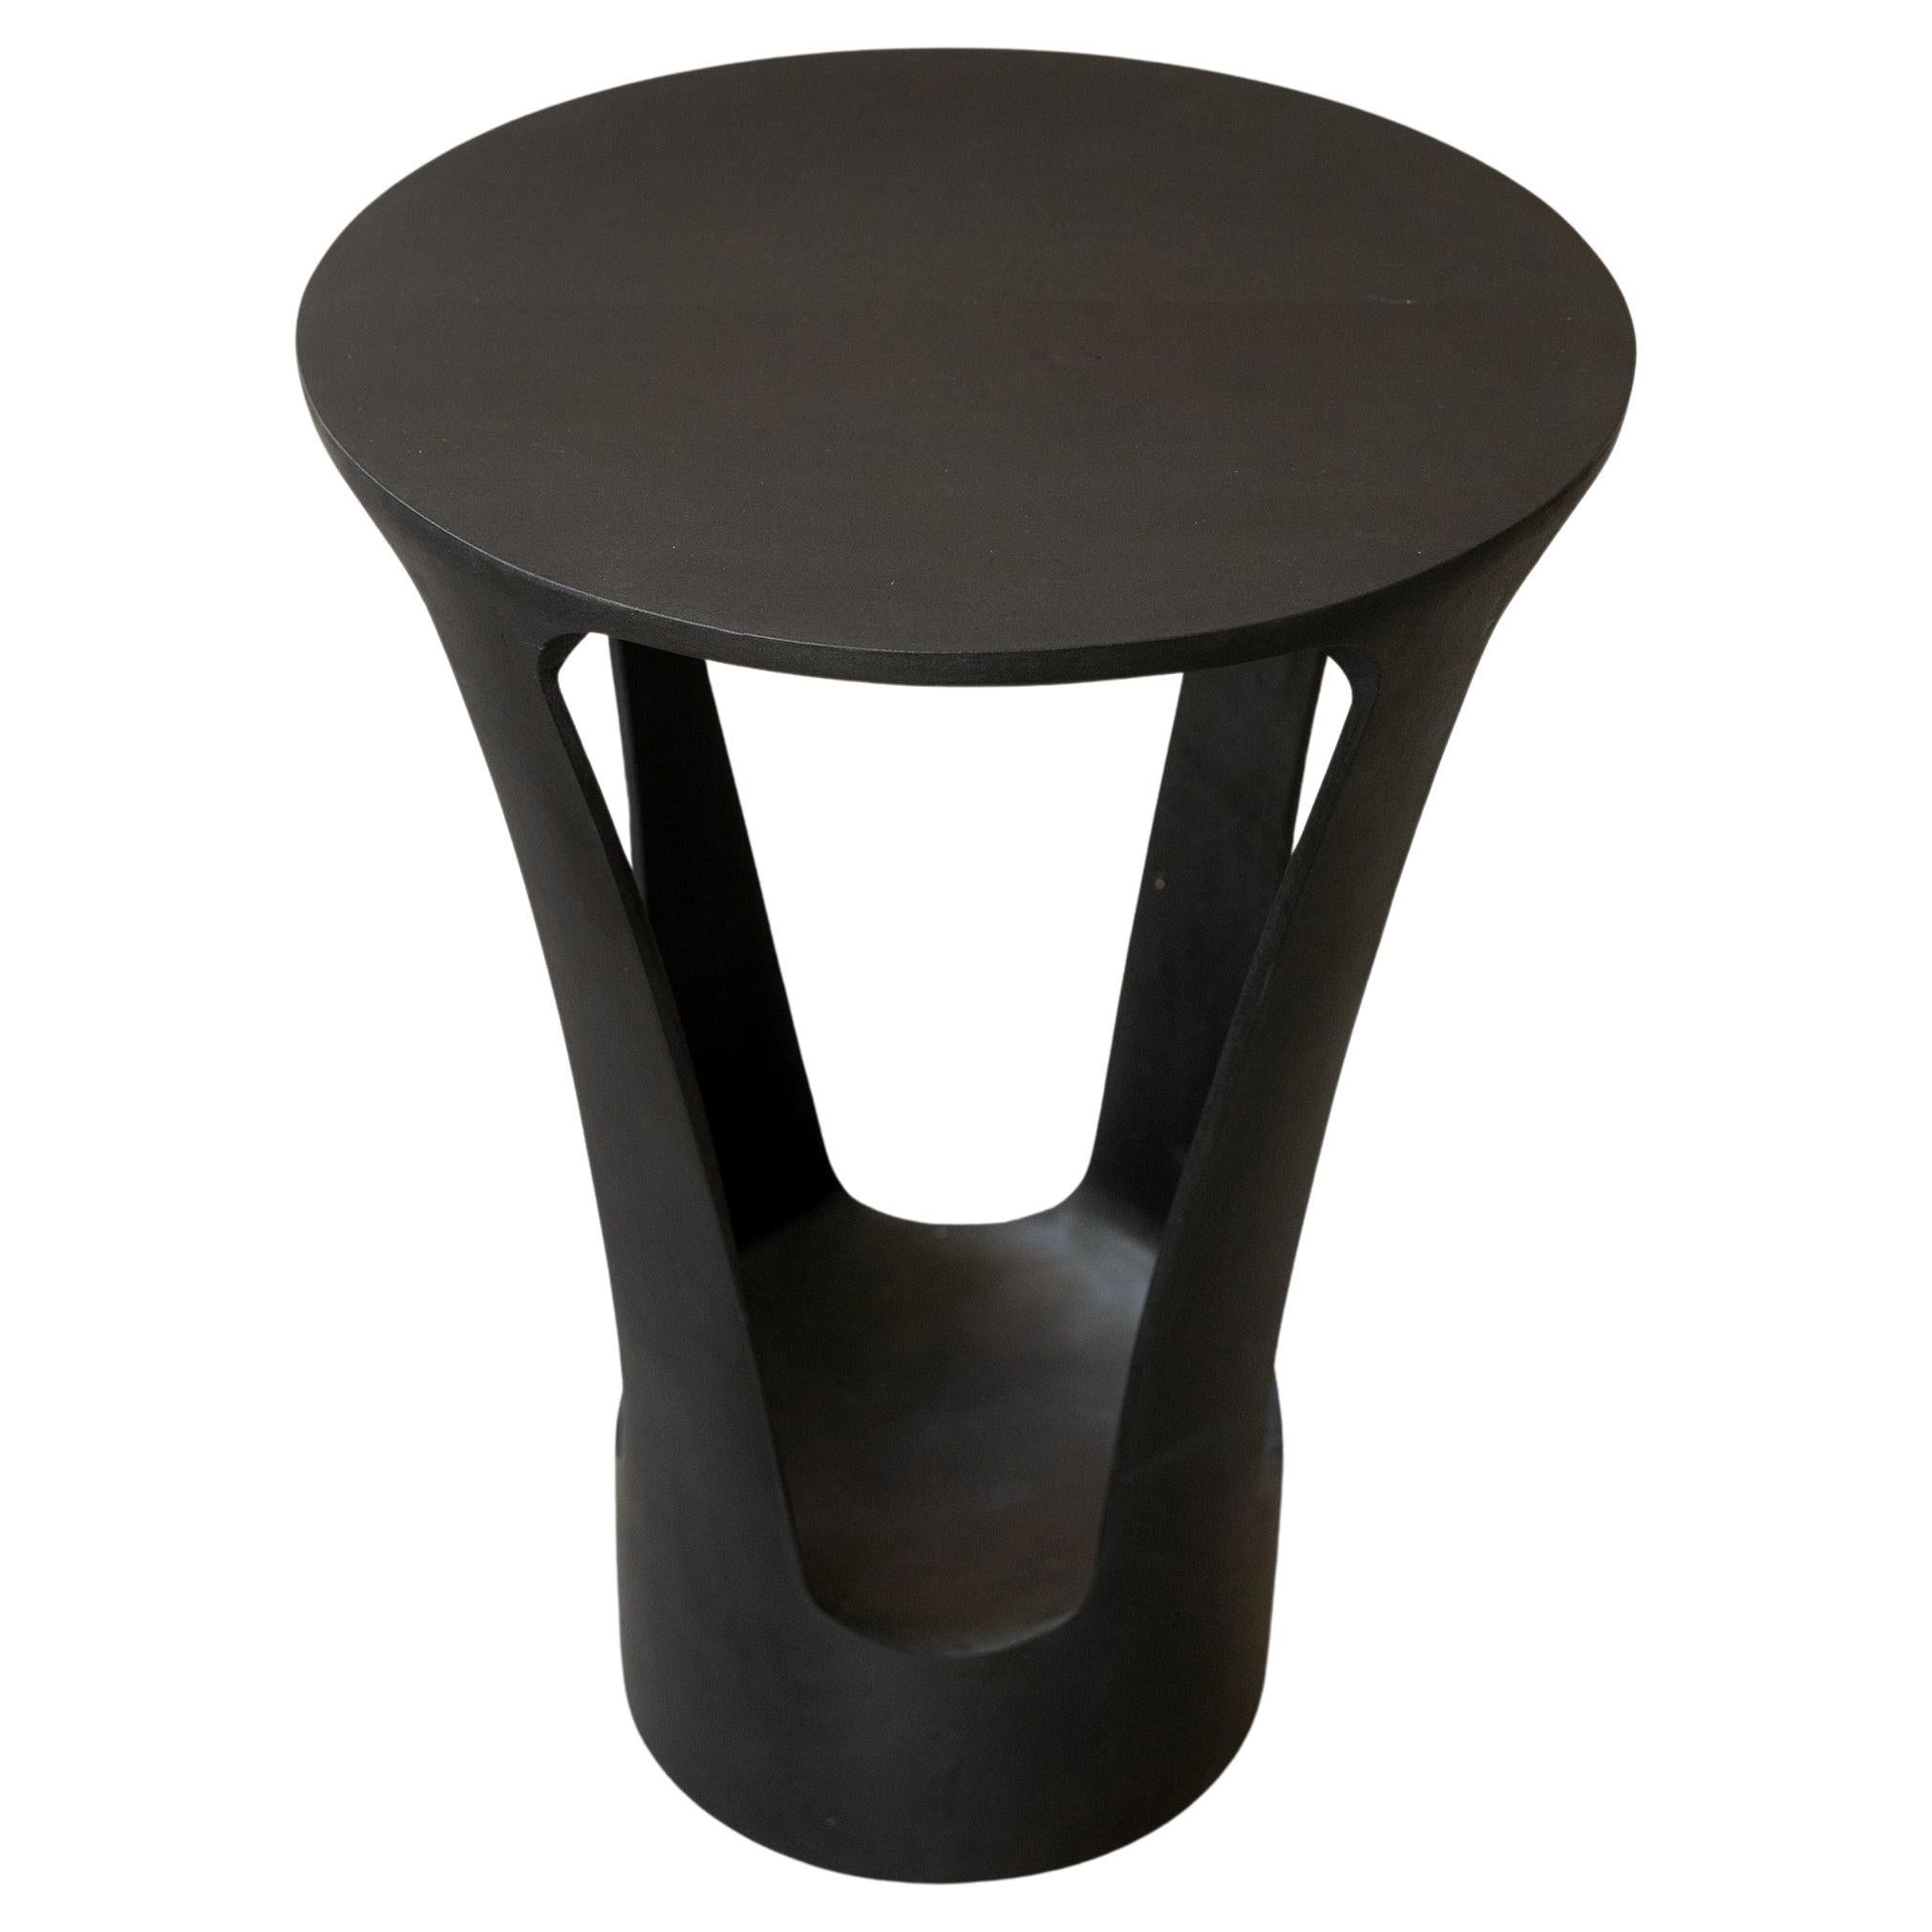 The Pedestal Table 